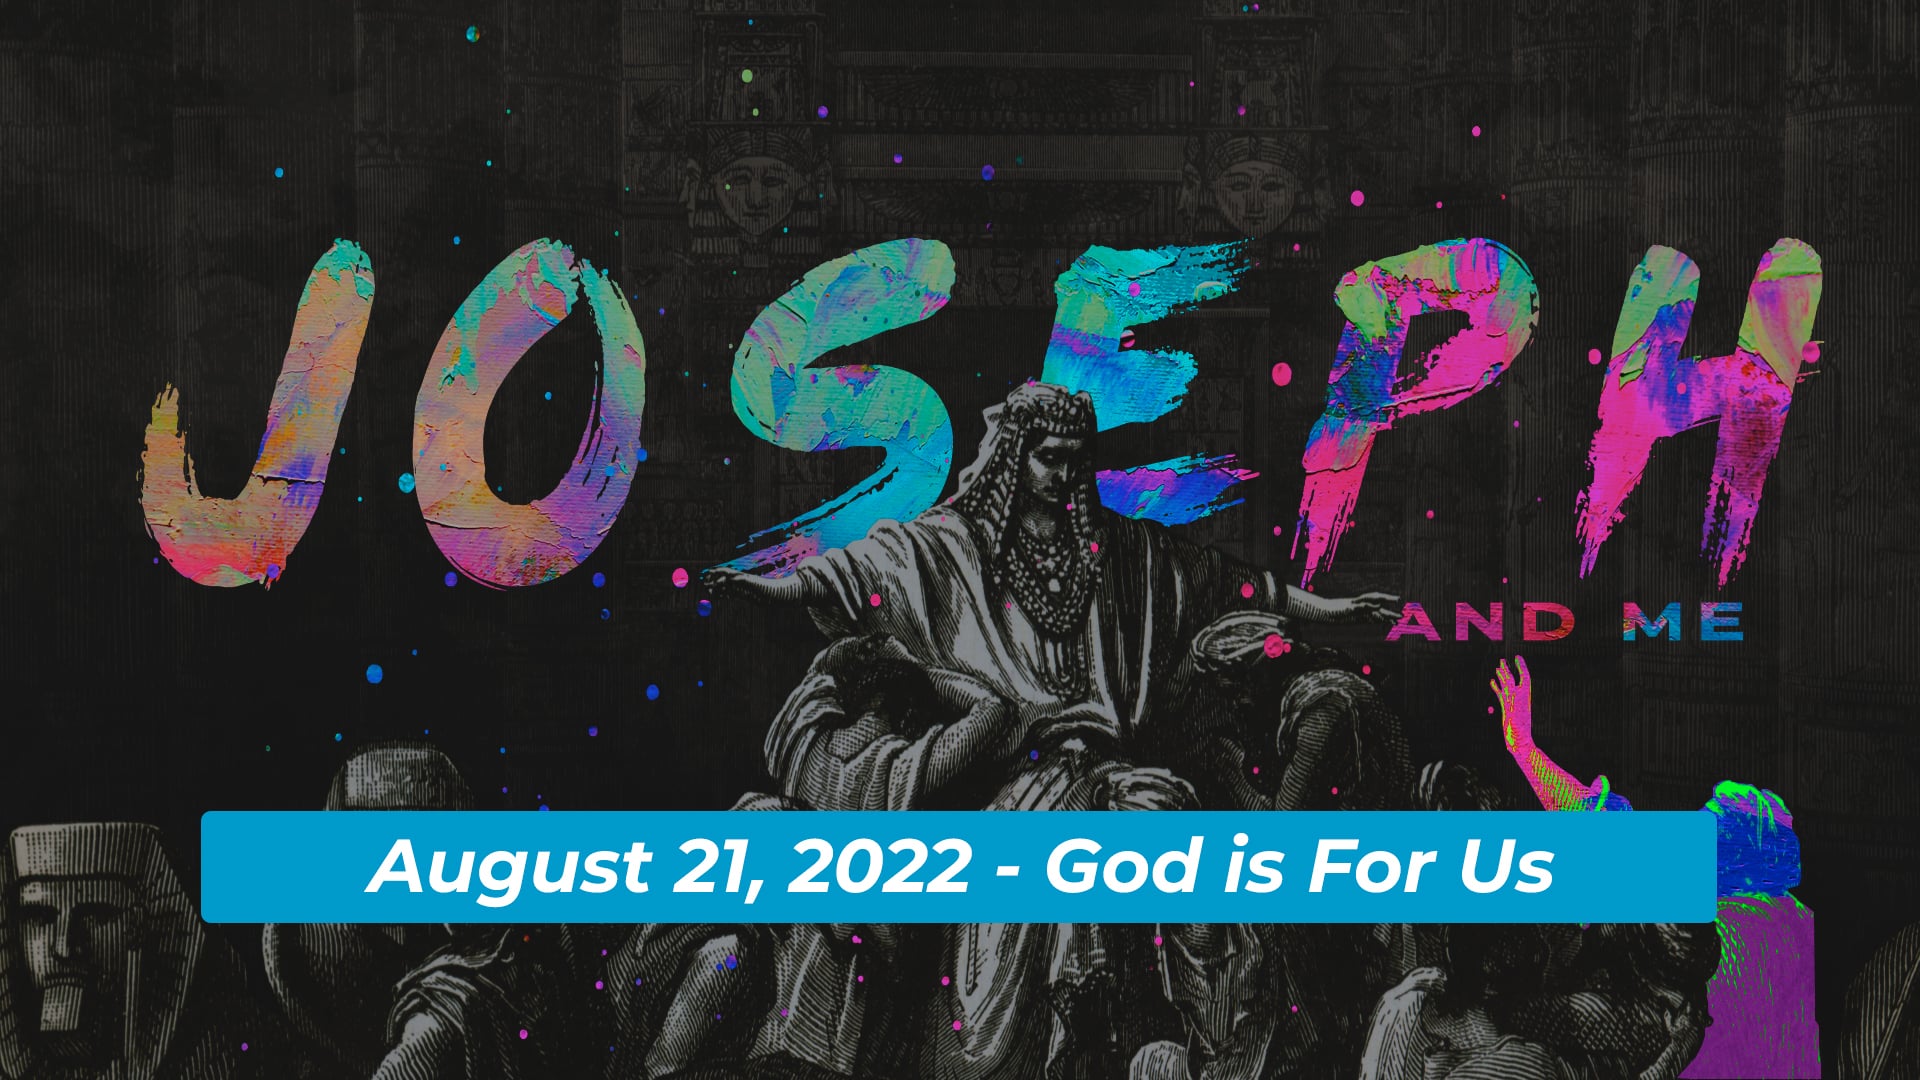 August 21, 2022 - Joseph & Me: God is For Us